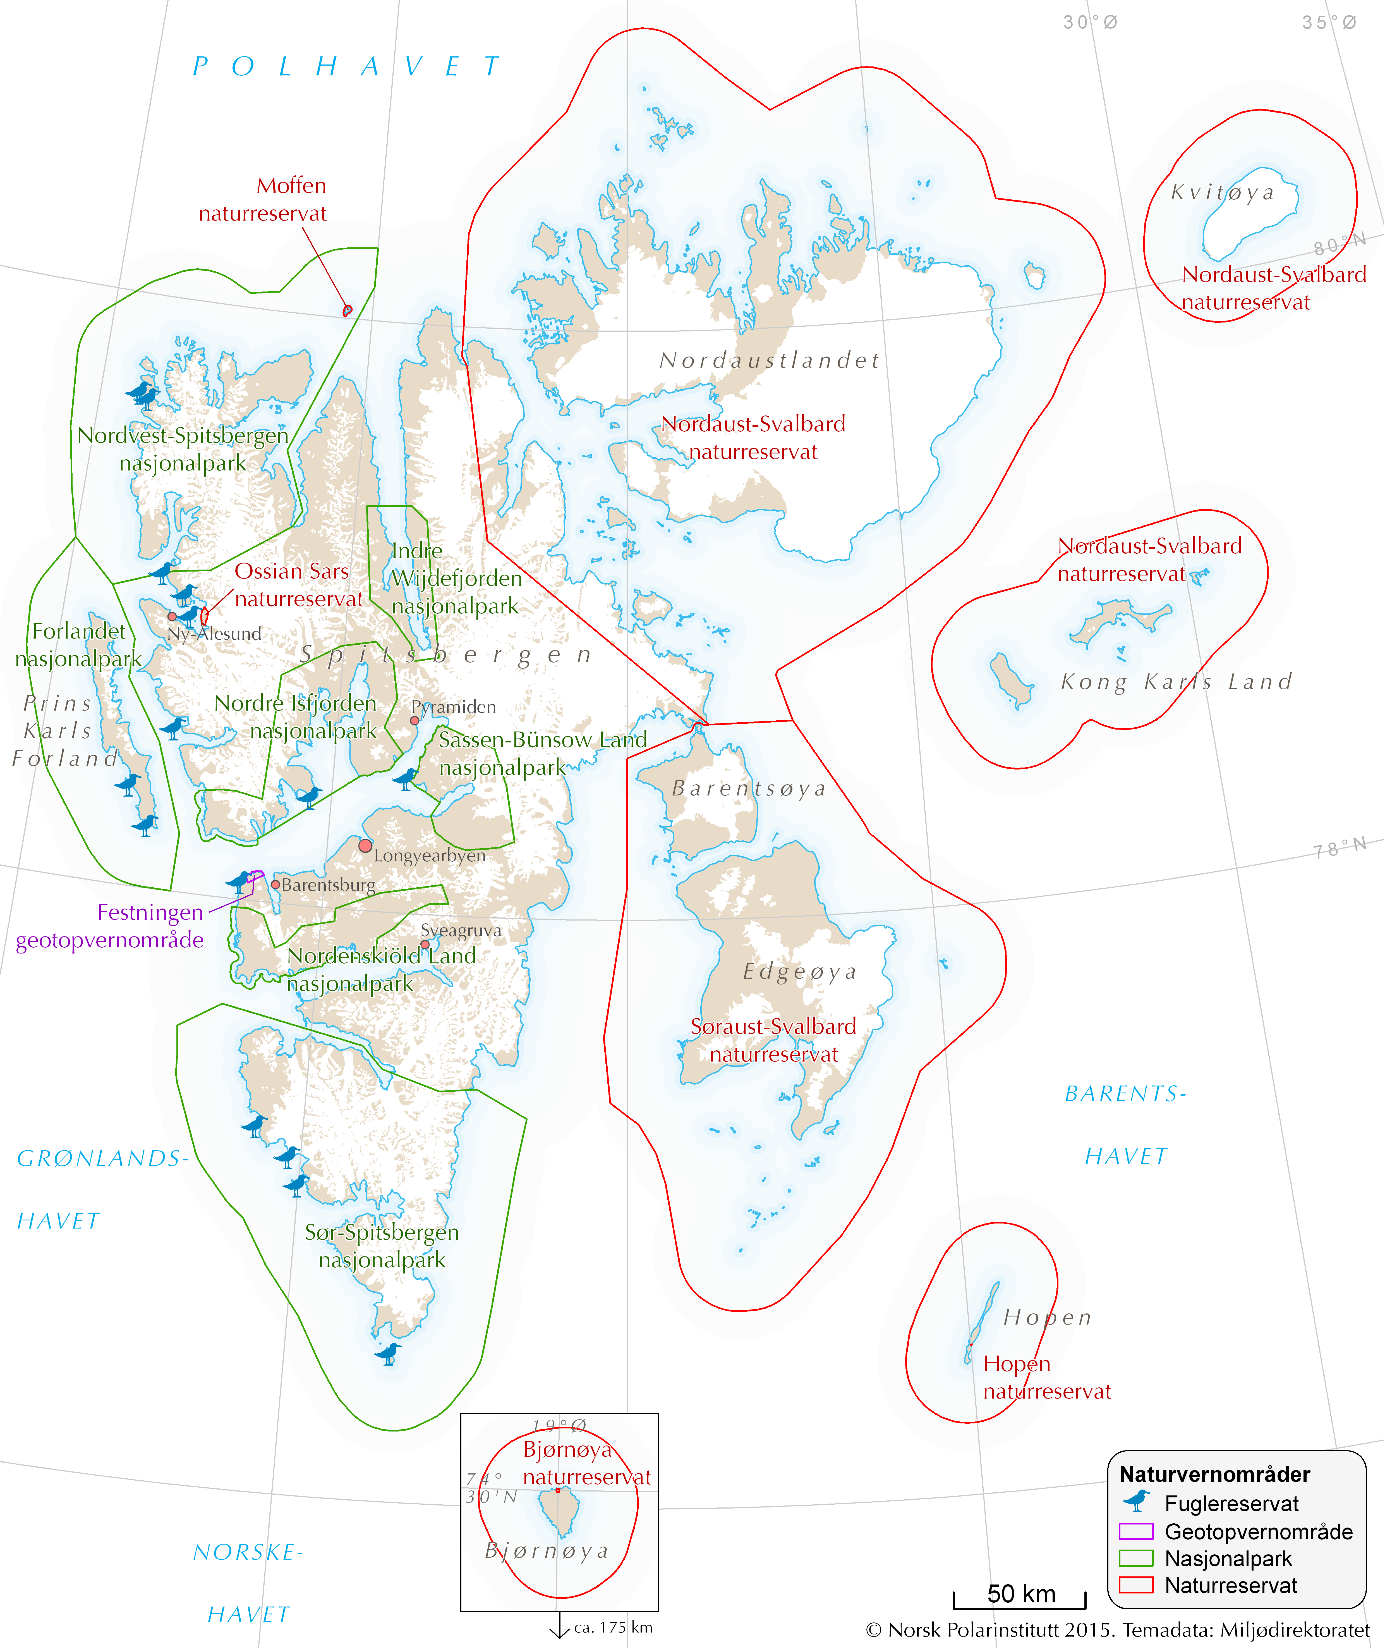 Appendix - map of protected areas in Svalbard The map below shows which areas in Svalbard that are protected (national parks, nature reserves and bird